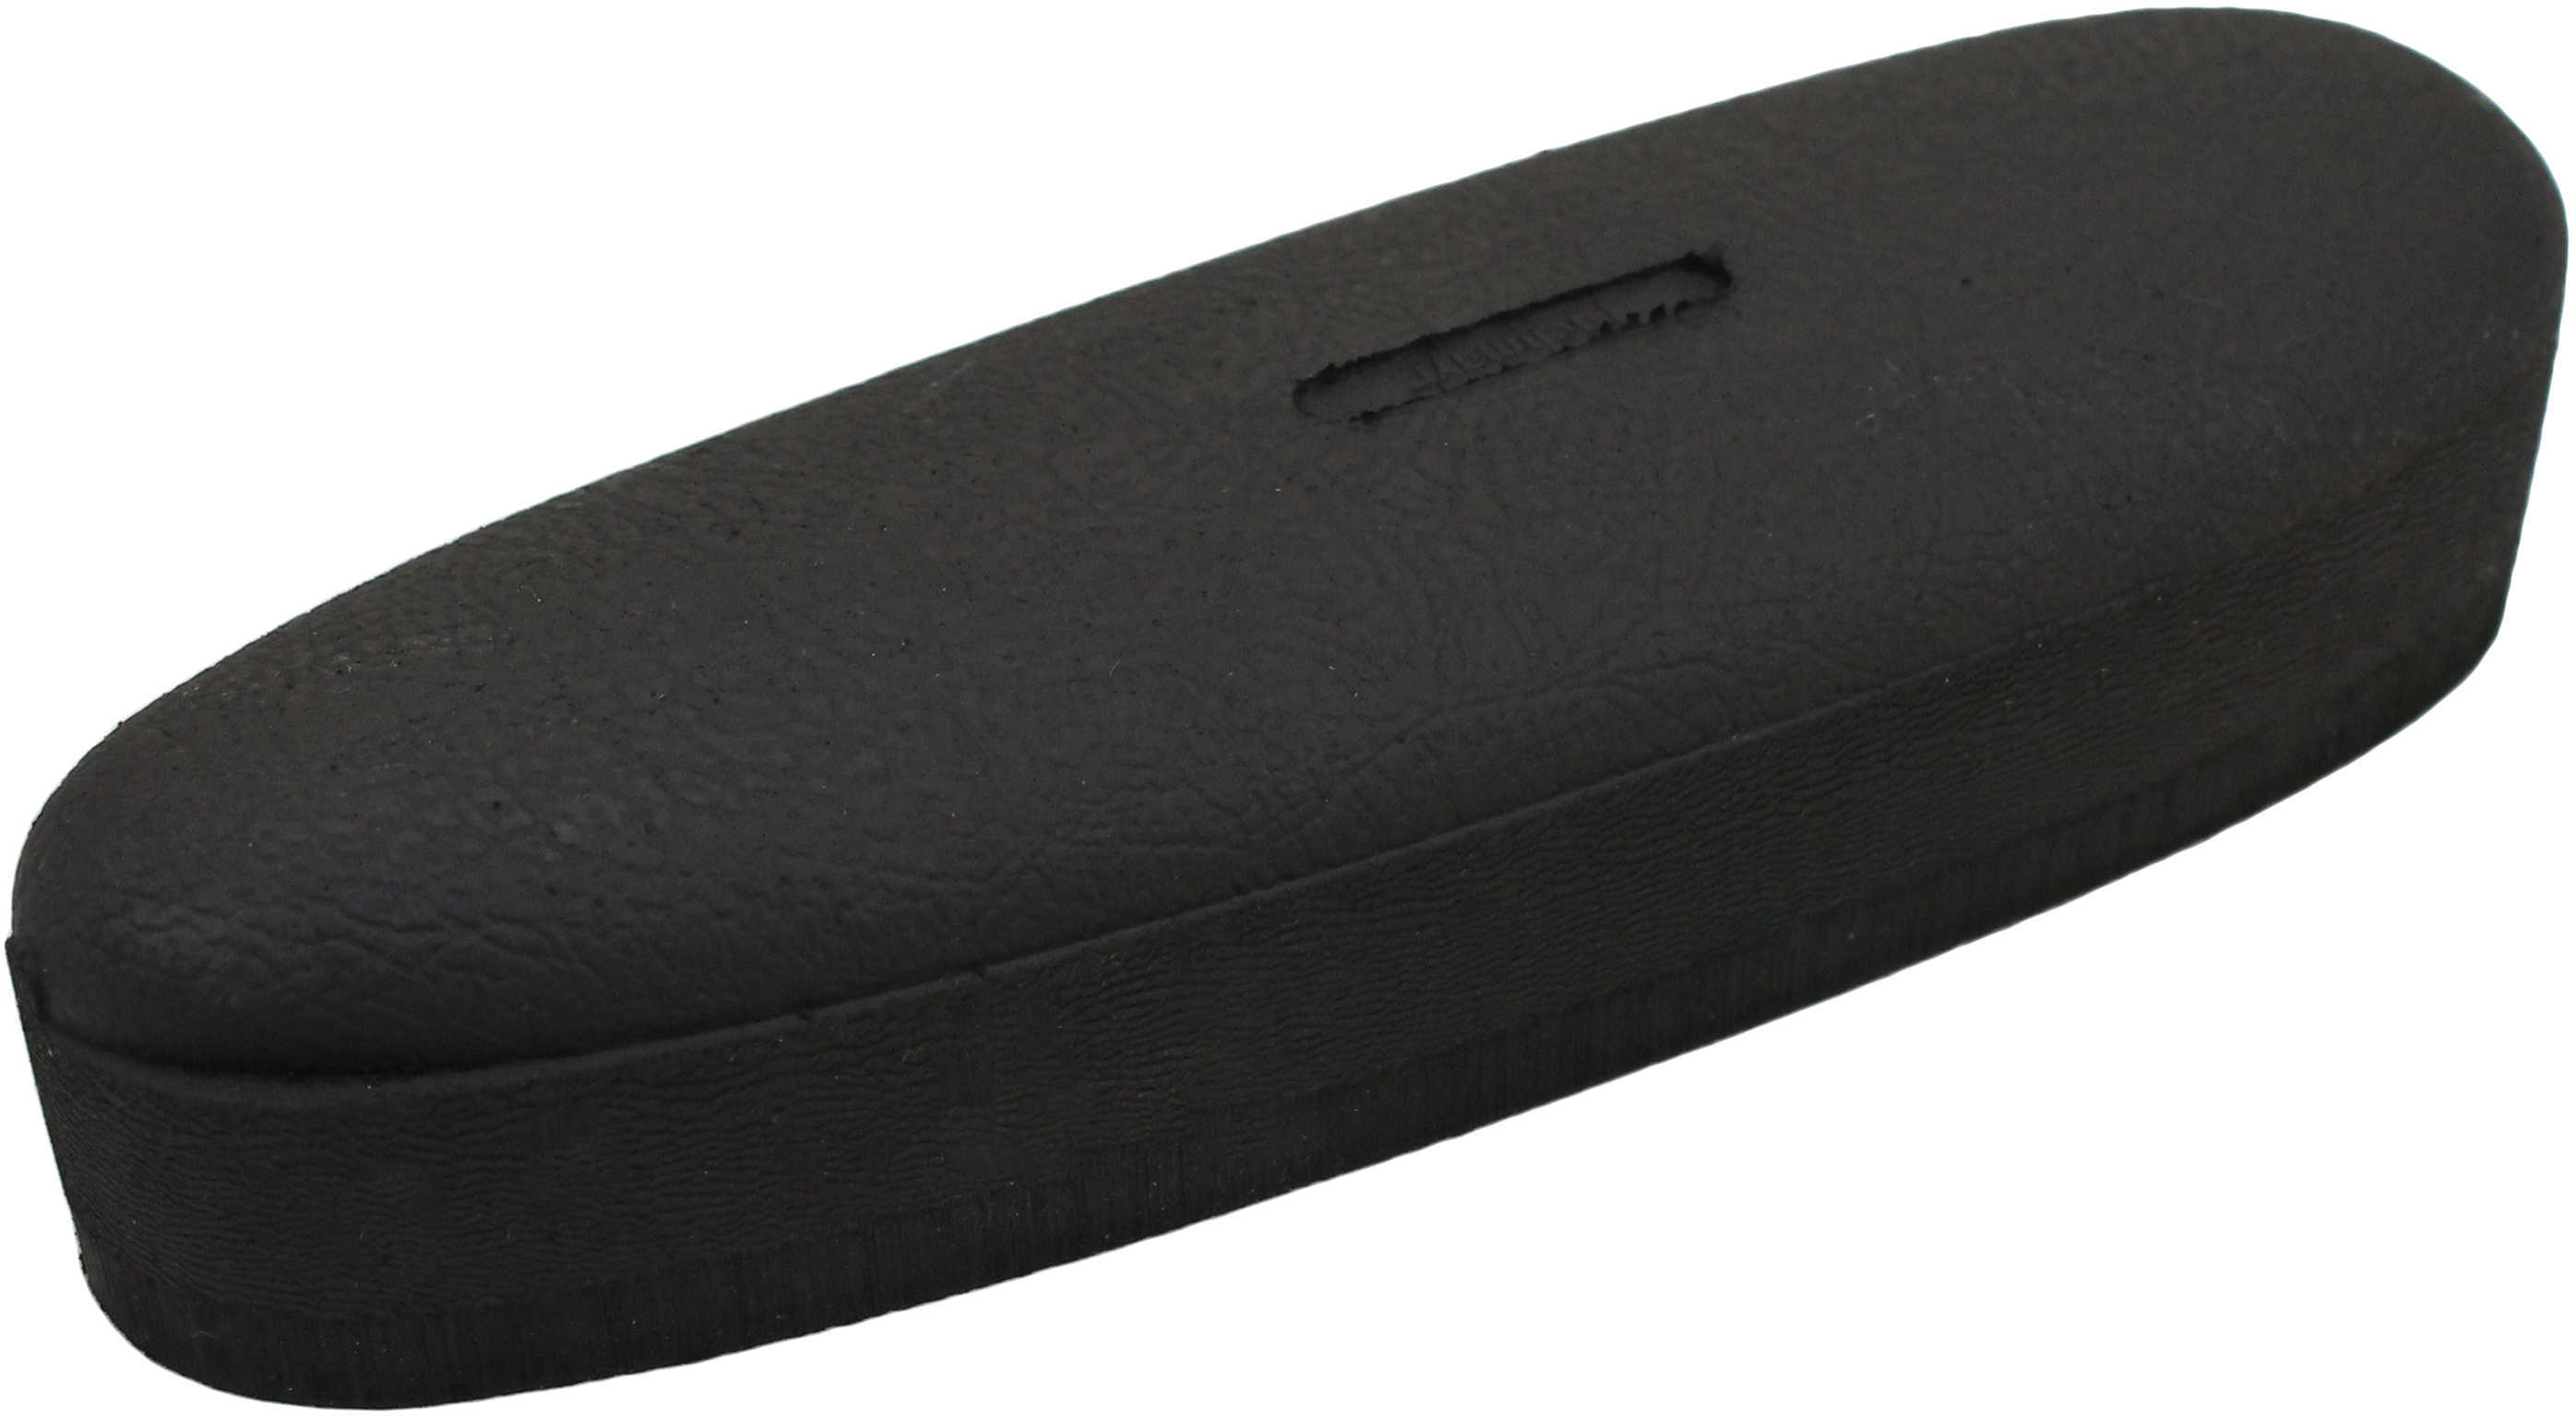 Pachmayr 752B Old English Recoil Pad, Black Md: 01601